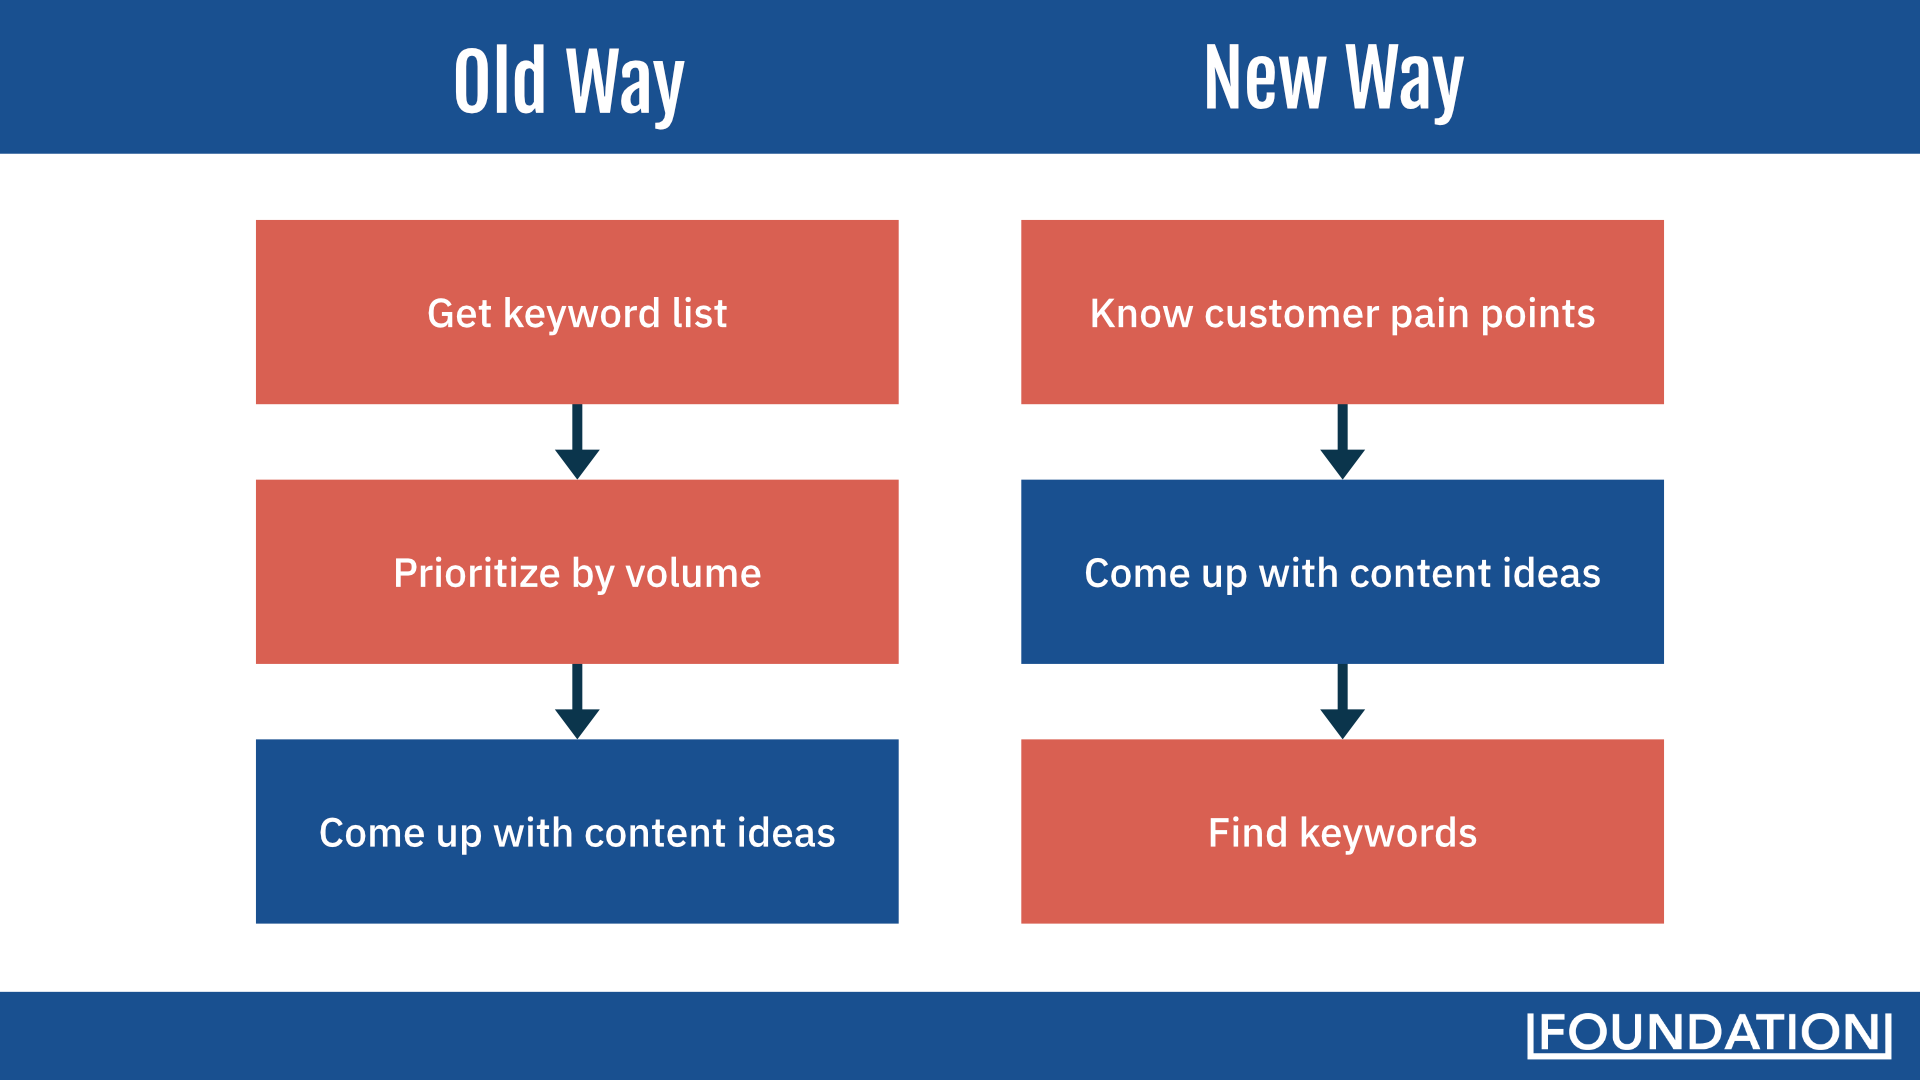 Image showing the old stages of ideation, get keyword list, prioritize by volume, and come up with content ideas, versus the new stages of ideation, know customer pain points, come up with content ideas, and find keywords